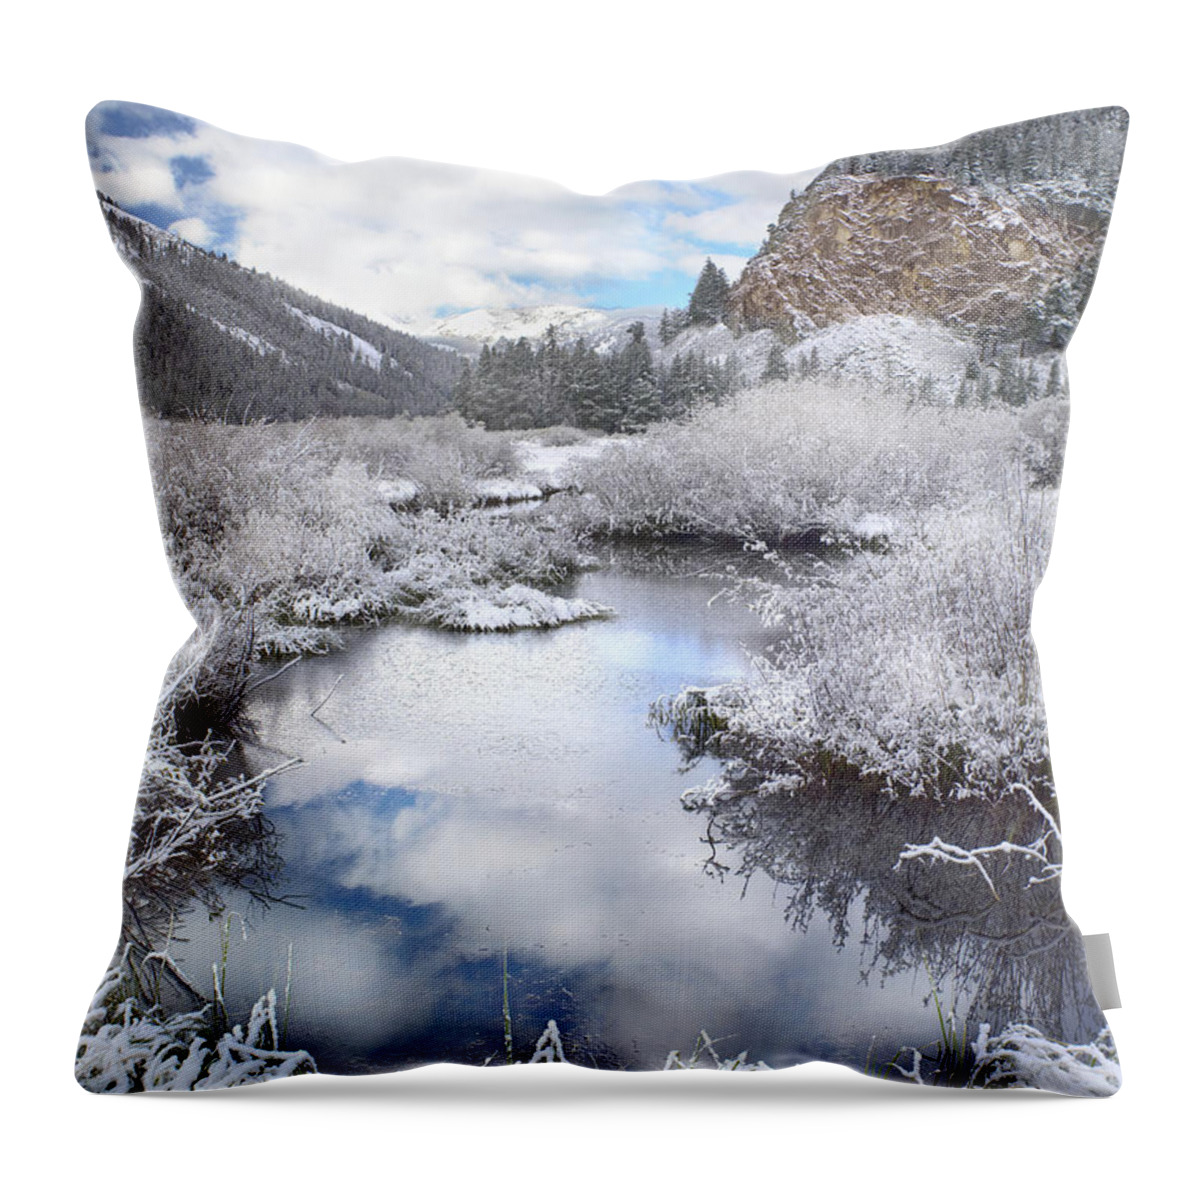 Feb0514 Throw Pillow featuring the photograph Boulder Mountains And Summit Creek Idaho by Tim Fitzharris